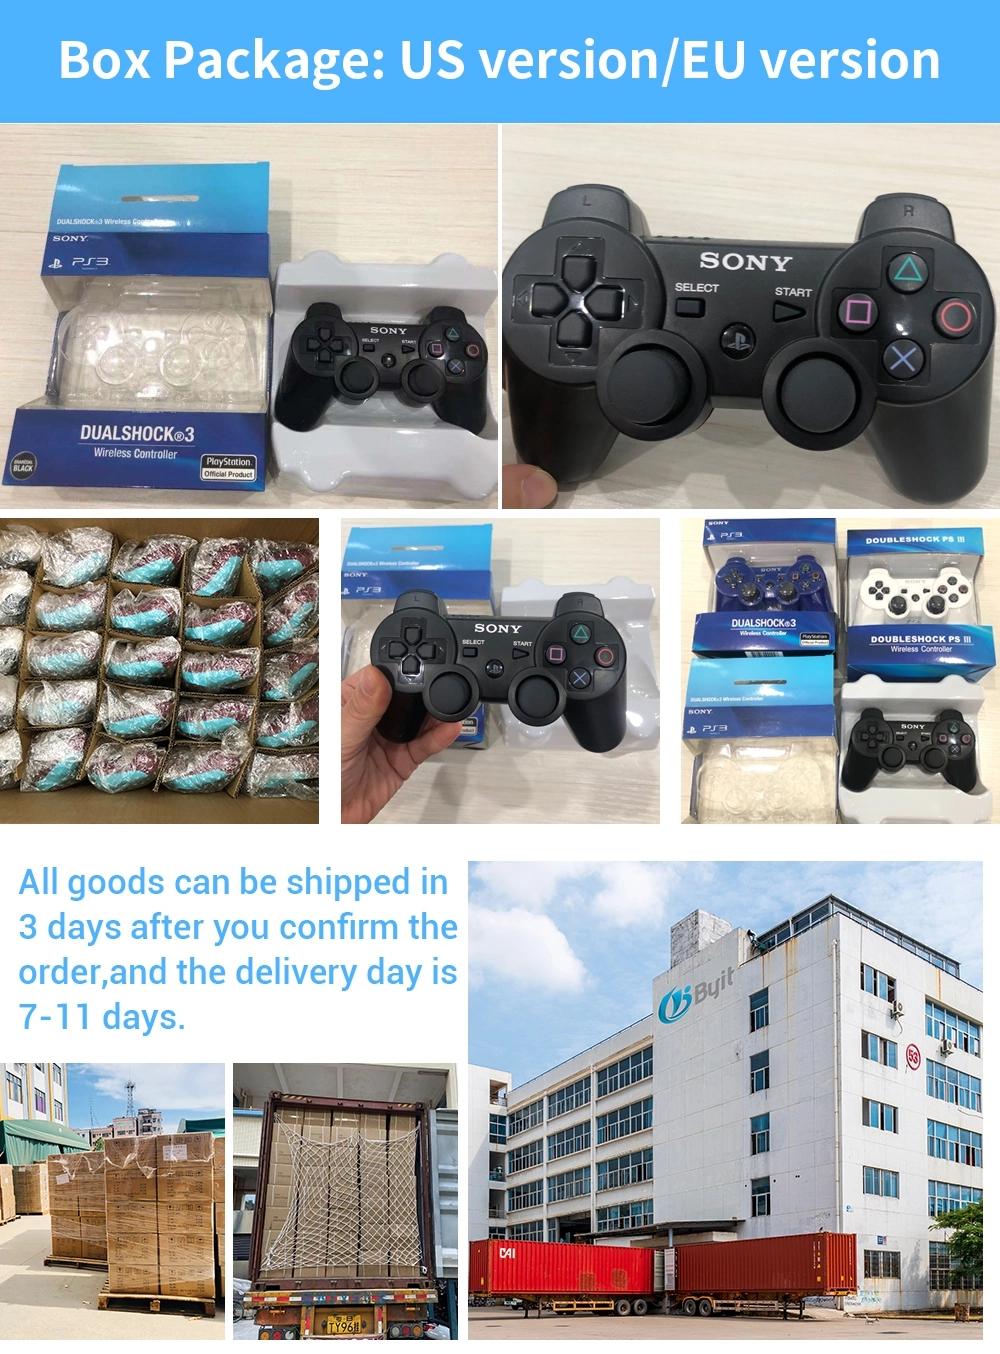 Byit Cheapest Bluetoth Controller for Sonips3 Gamepad for Play Station 3 Wireless Joystick for Soni Playstation 3 PC